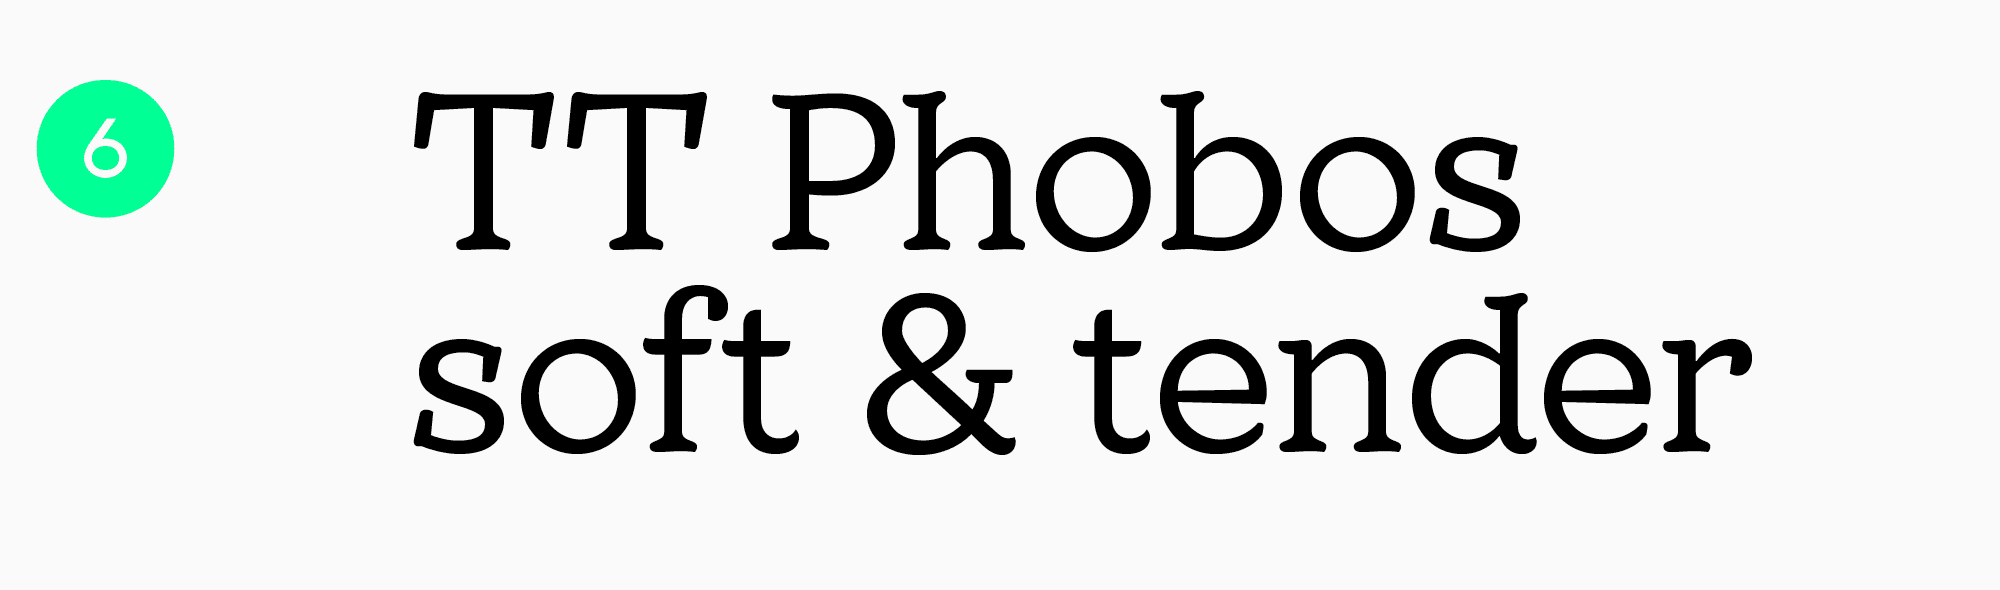 title page fonts TT Phobos